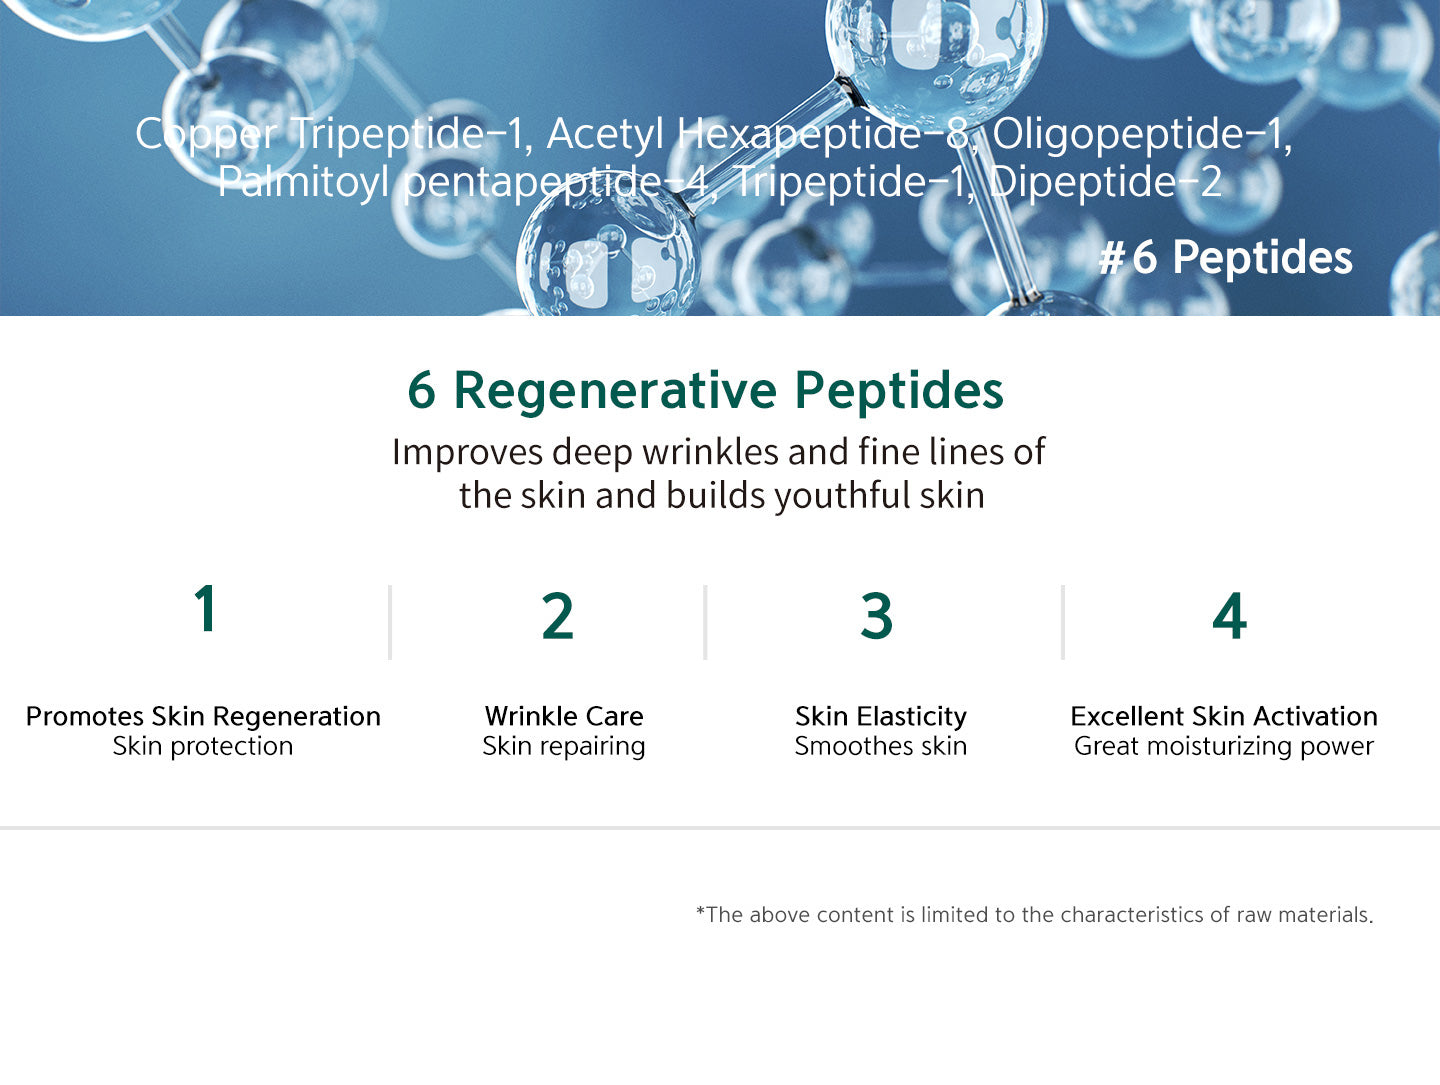 6 regenerative peptides improves deep wrinkles and fine lines of the skin and builds youthful skin. Promotes skin regeneration, wrinkle care, skin elasticity and excellent skin activation. 